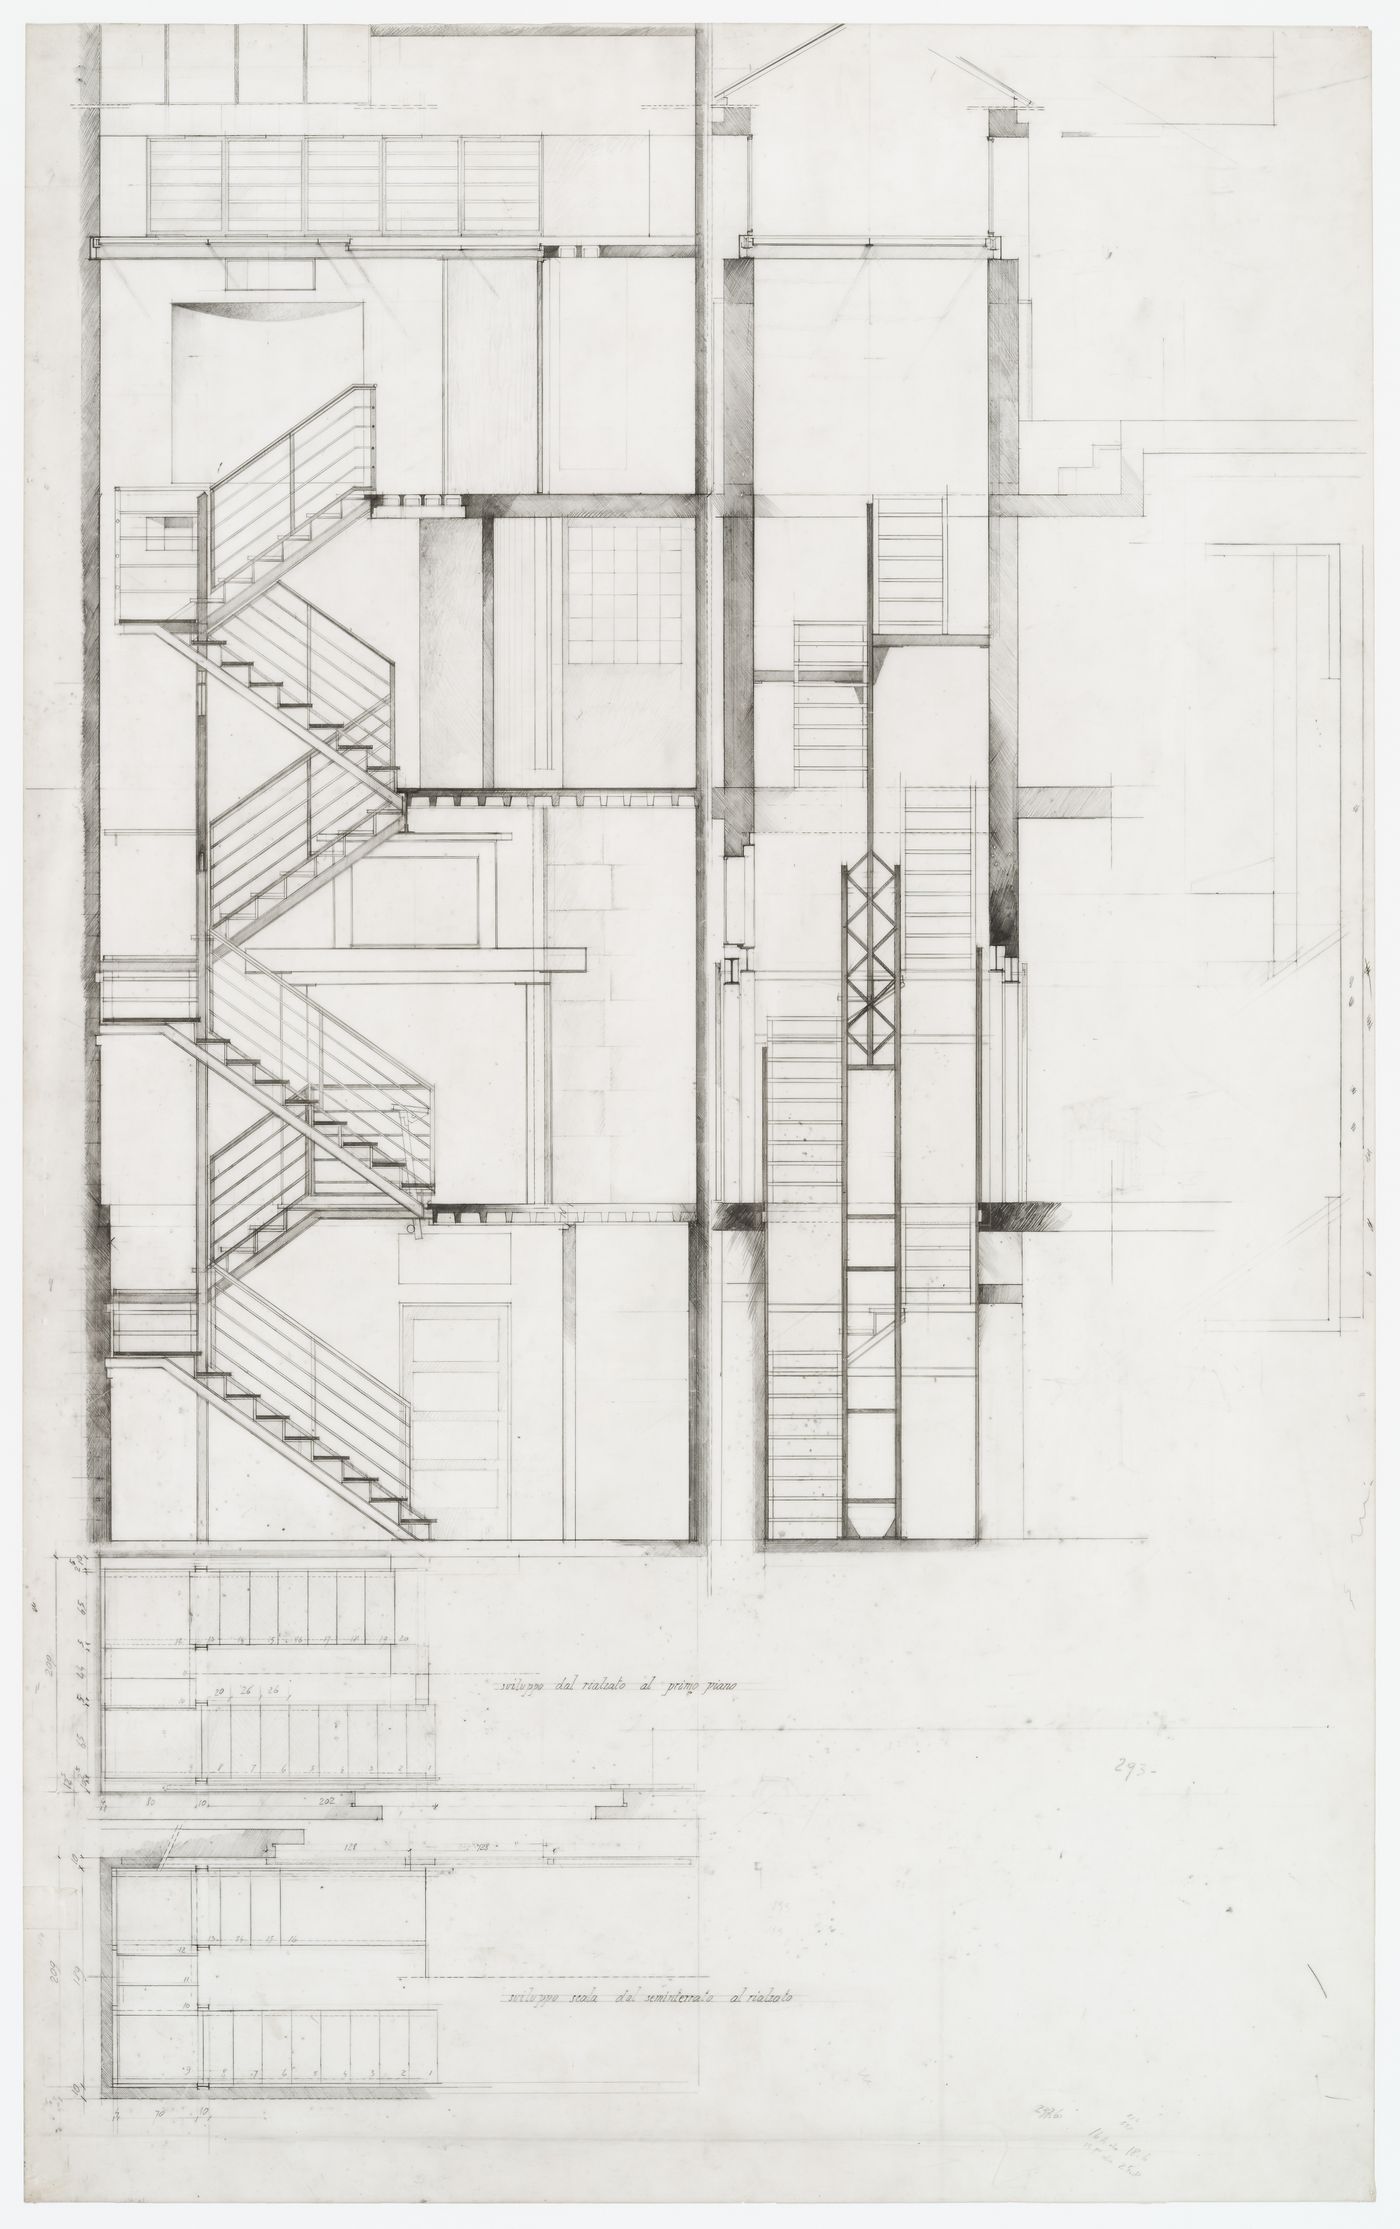 Elevation, section and plan of the stairs for Casa Frea, Milan, Italy